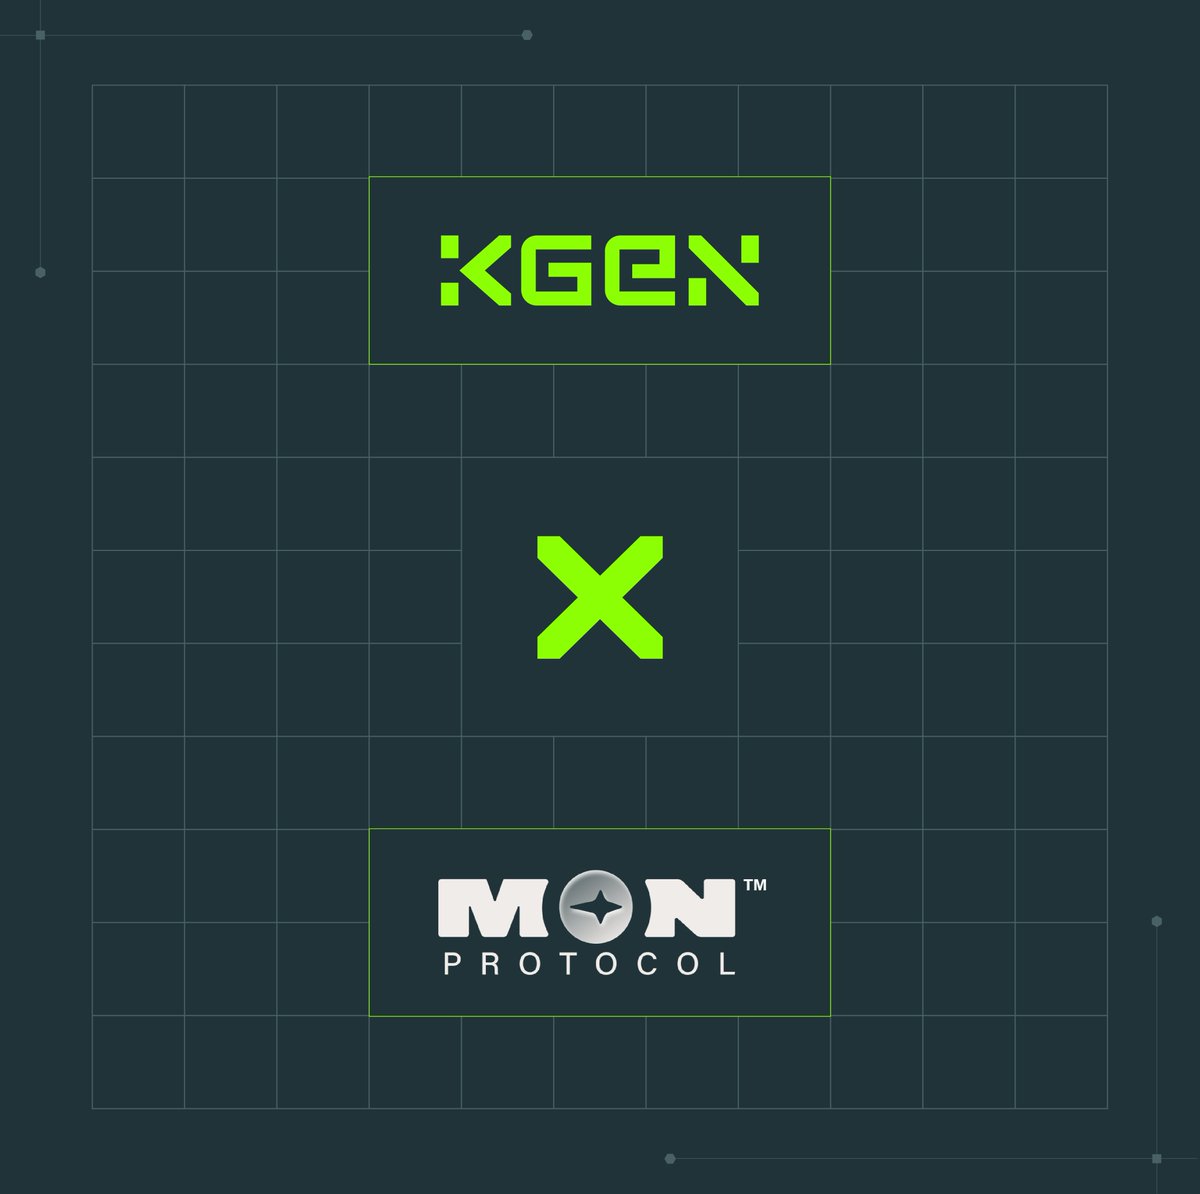 THIS IS BIG! KGeN and @monprotocol squad up 💪 Onwards and upwards — here’s to more innovative collaborations, here’s to building a future for Web3 Gaming.